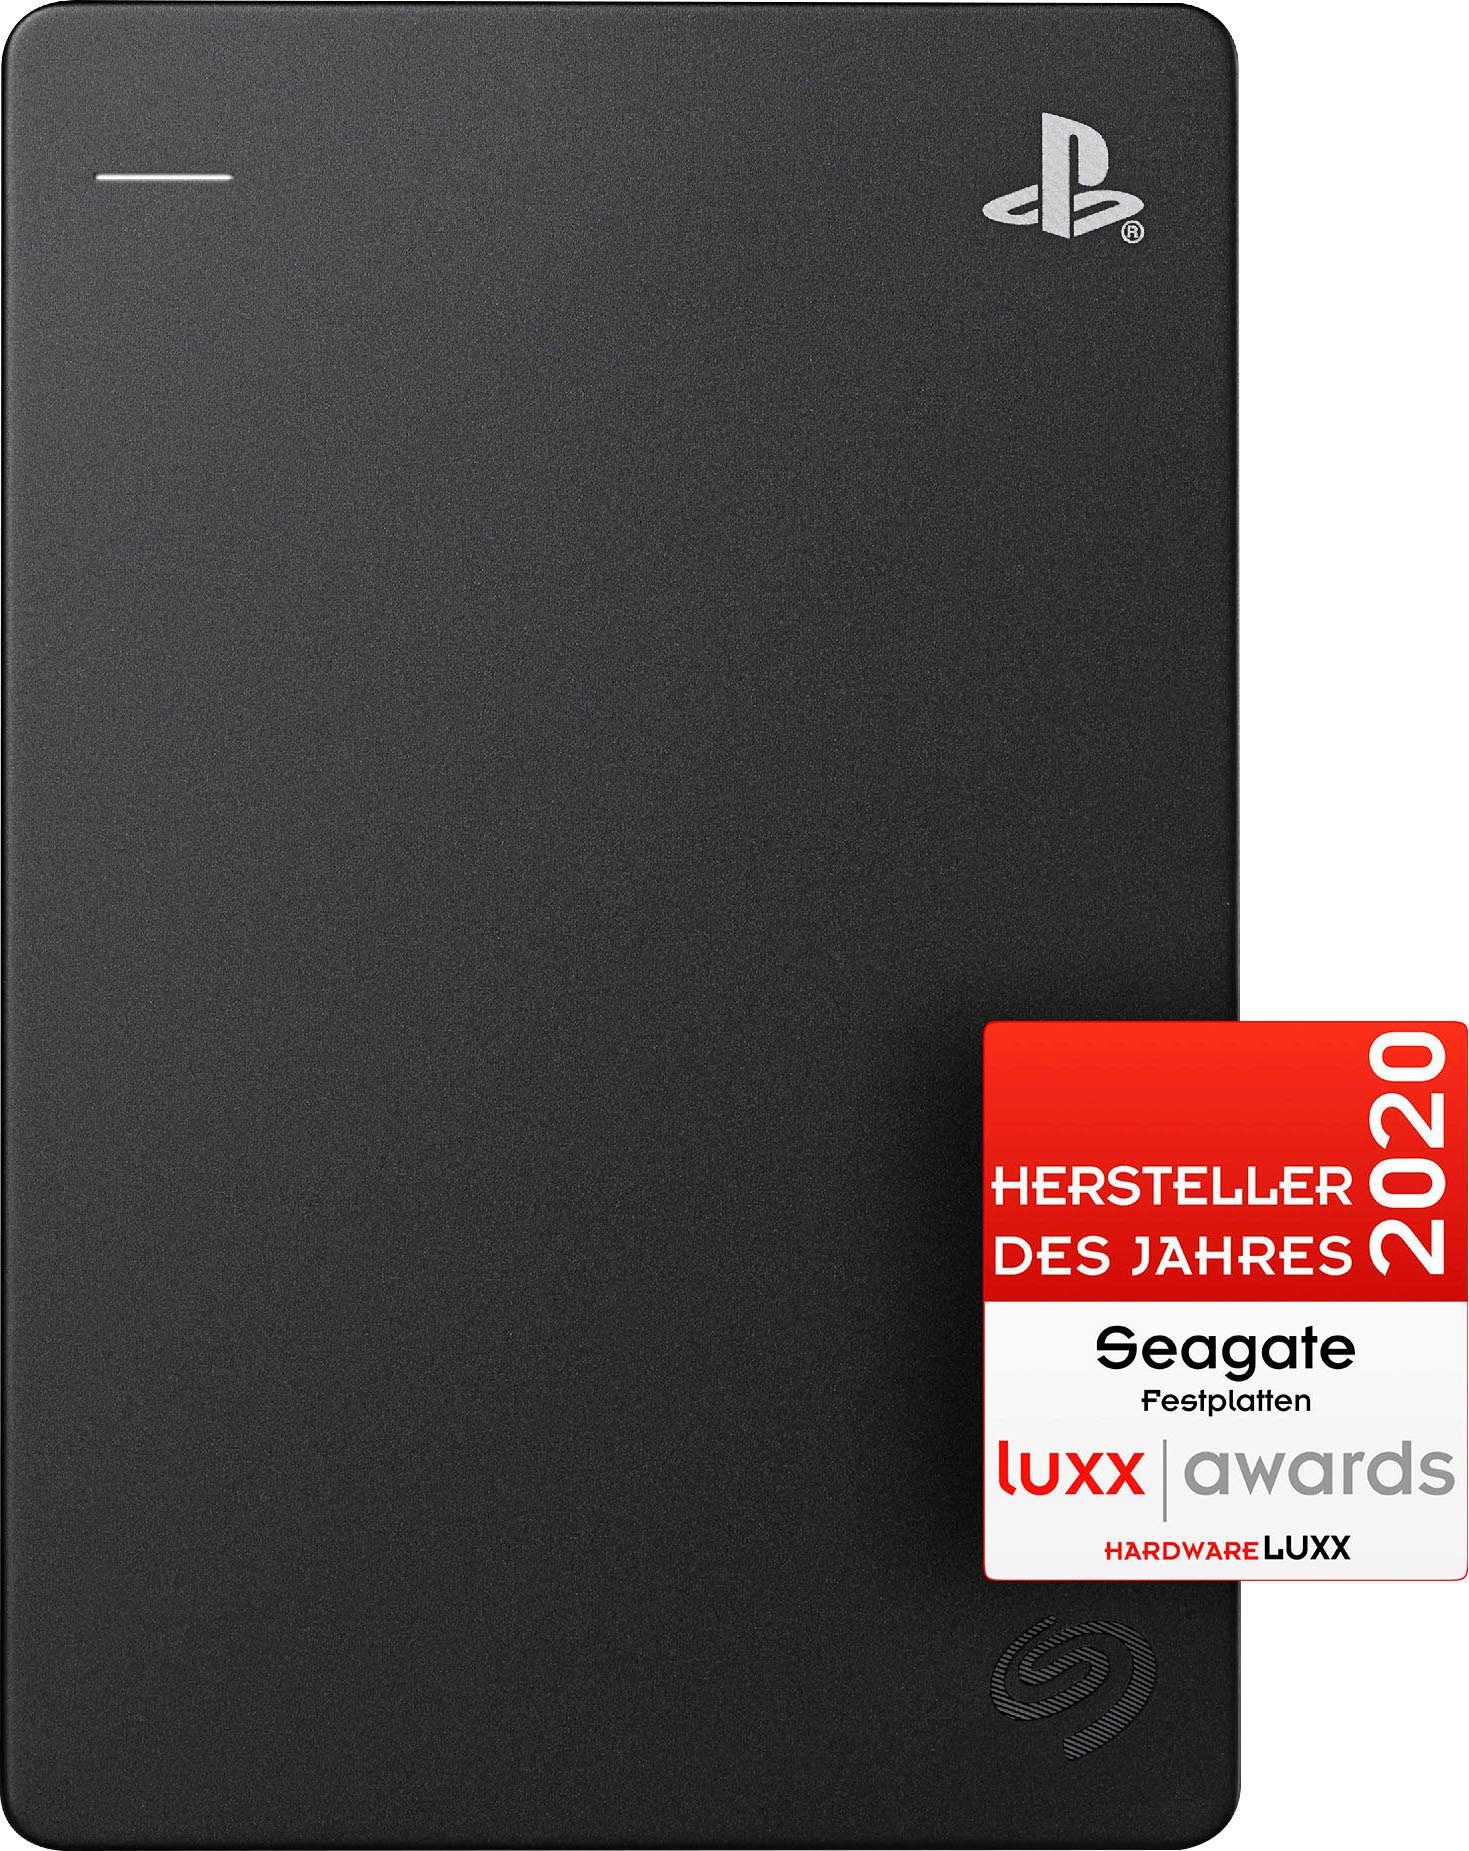 externe TB) 2,5" PS4 Game Gaming-Festplatte Seagate STGD2000200 (2 Drive